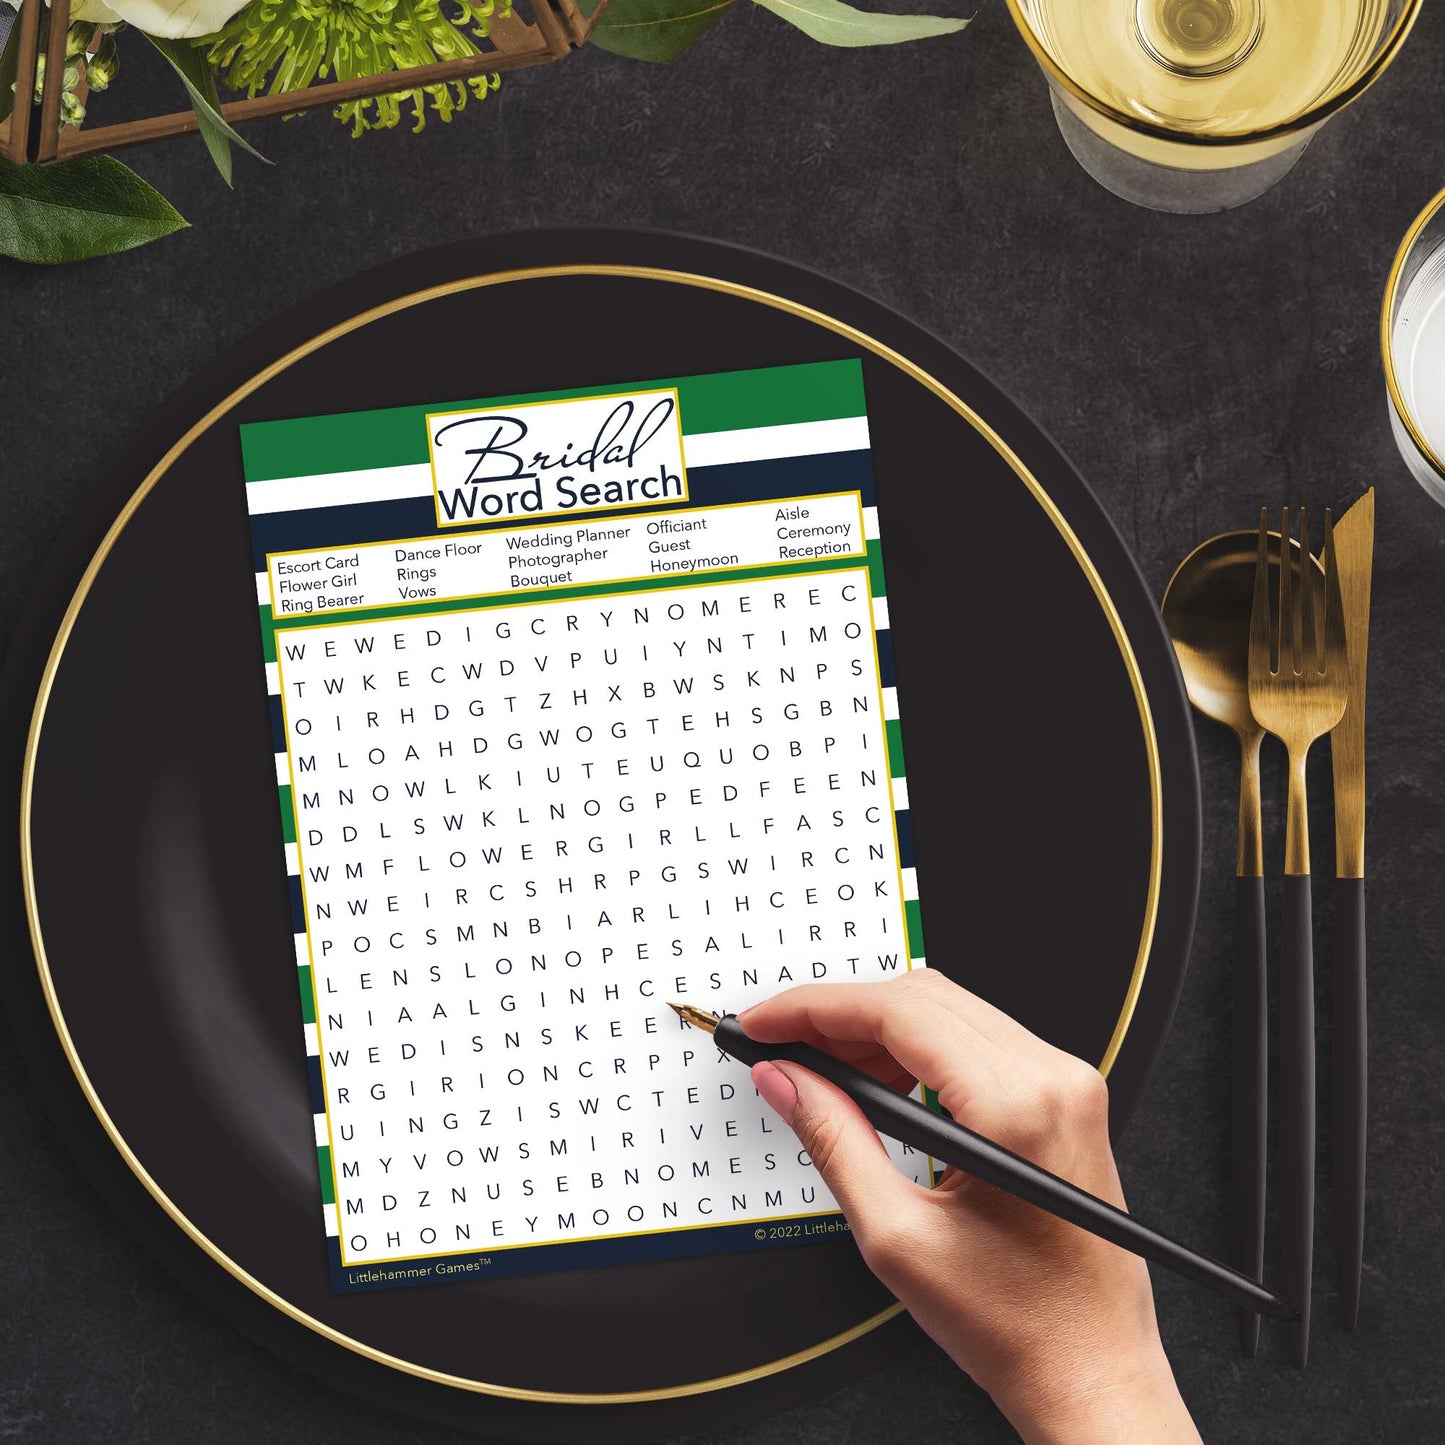 Woman with a pen playing a green and navy-striped Bridal Word Search game card at a dark place setting